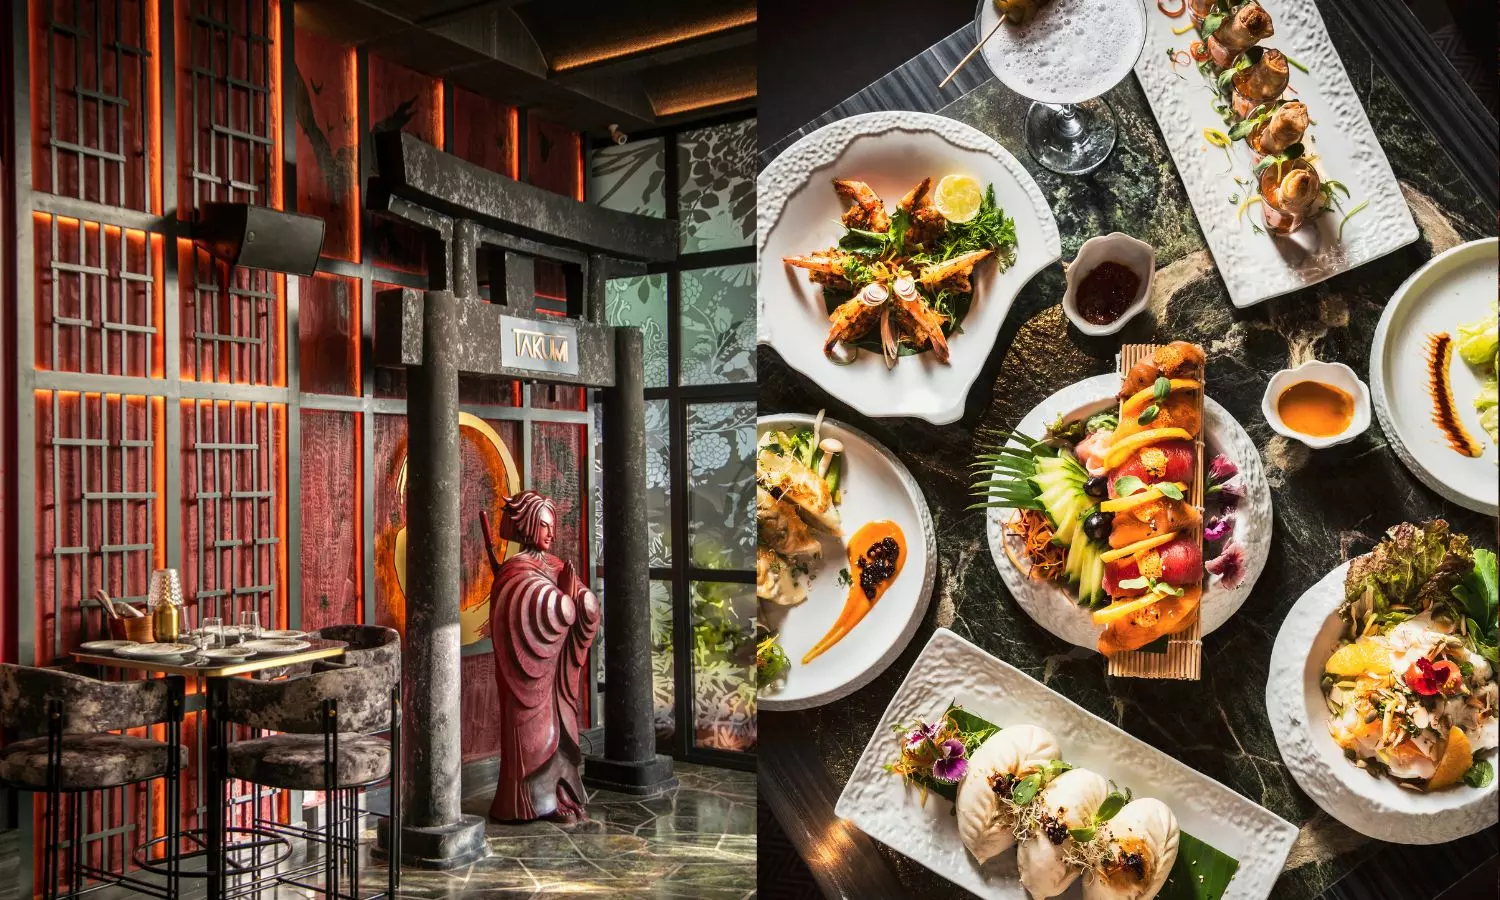 TAKUMI introduces a wholesome Southeast Asian Influence to Mumbais innovative dining experience